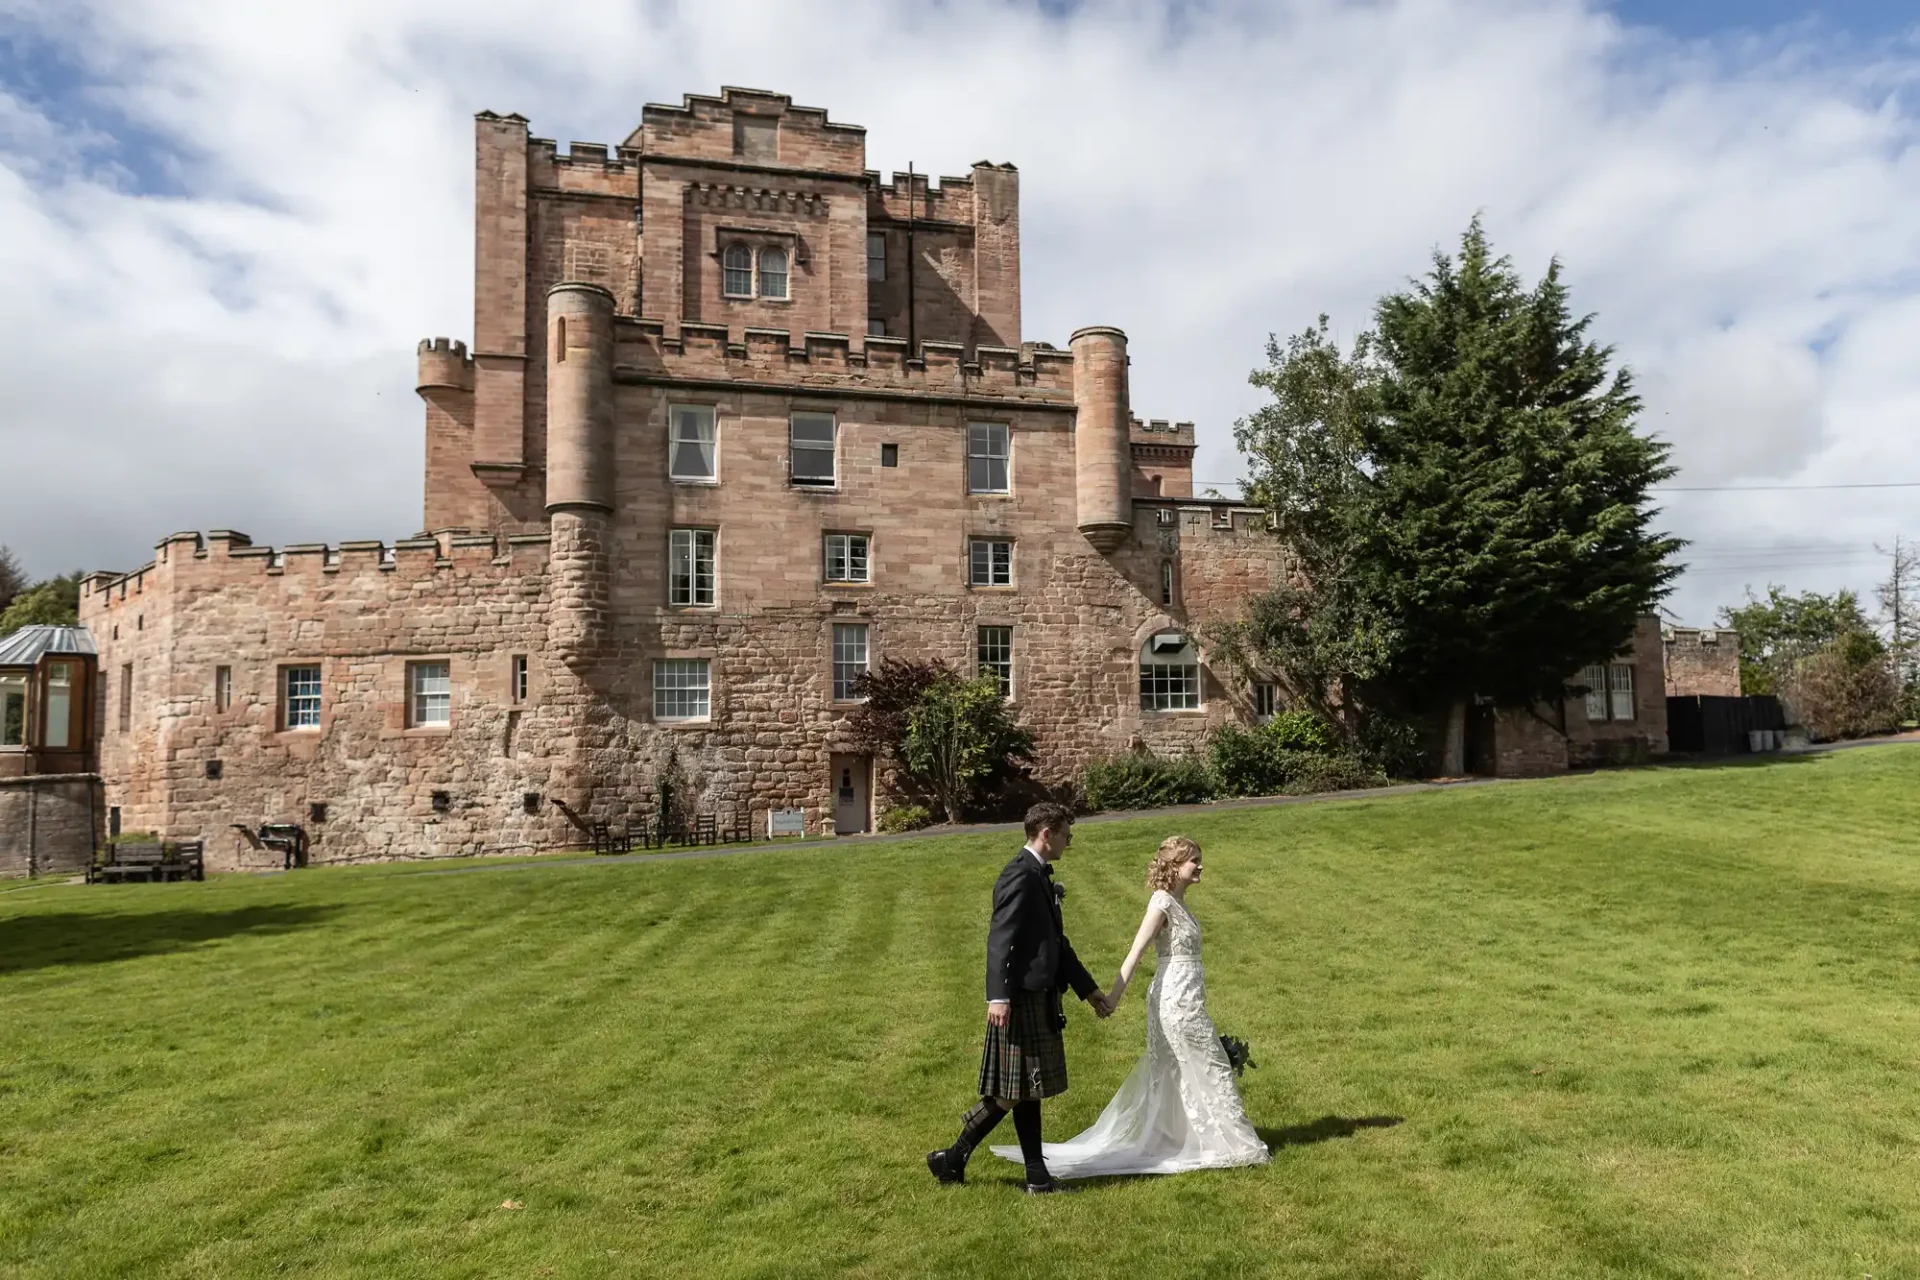 Wedding photography at Dalhousie Castle: a bride and groom walk hand in hand on a lawn in front of a large stone castle under a cloudy sky. The groom is wearing a kilt and the bride is in a white gown.